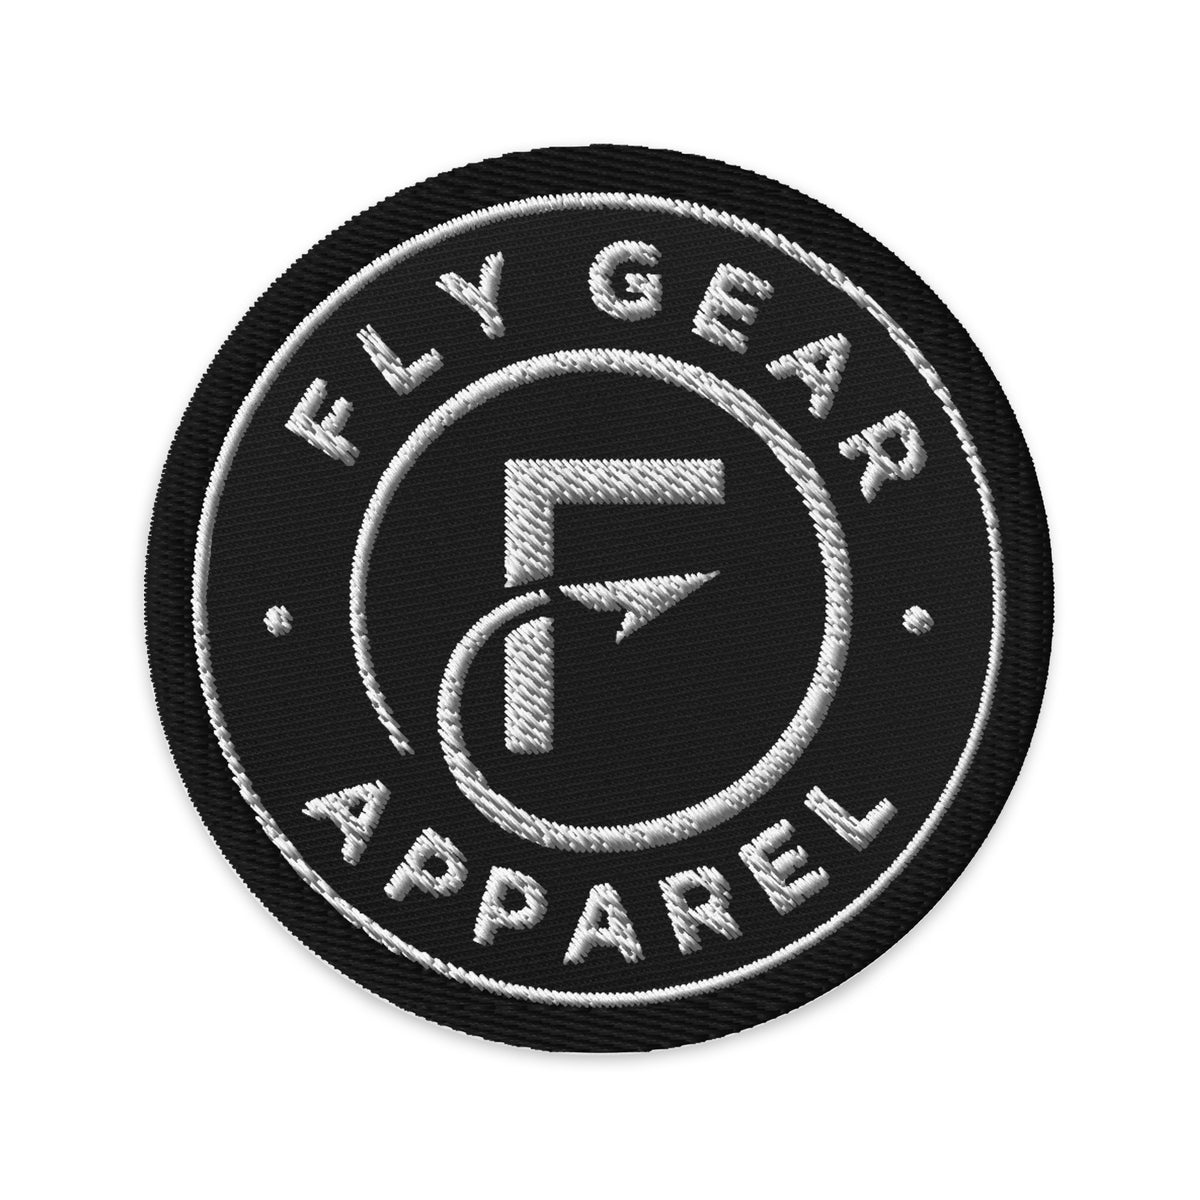 Embroidered patches – Fly Gear